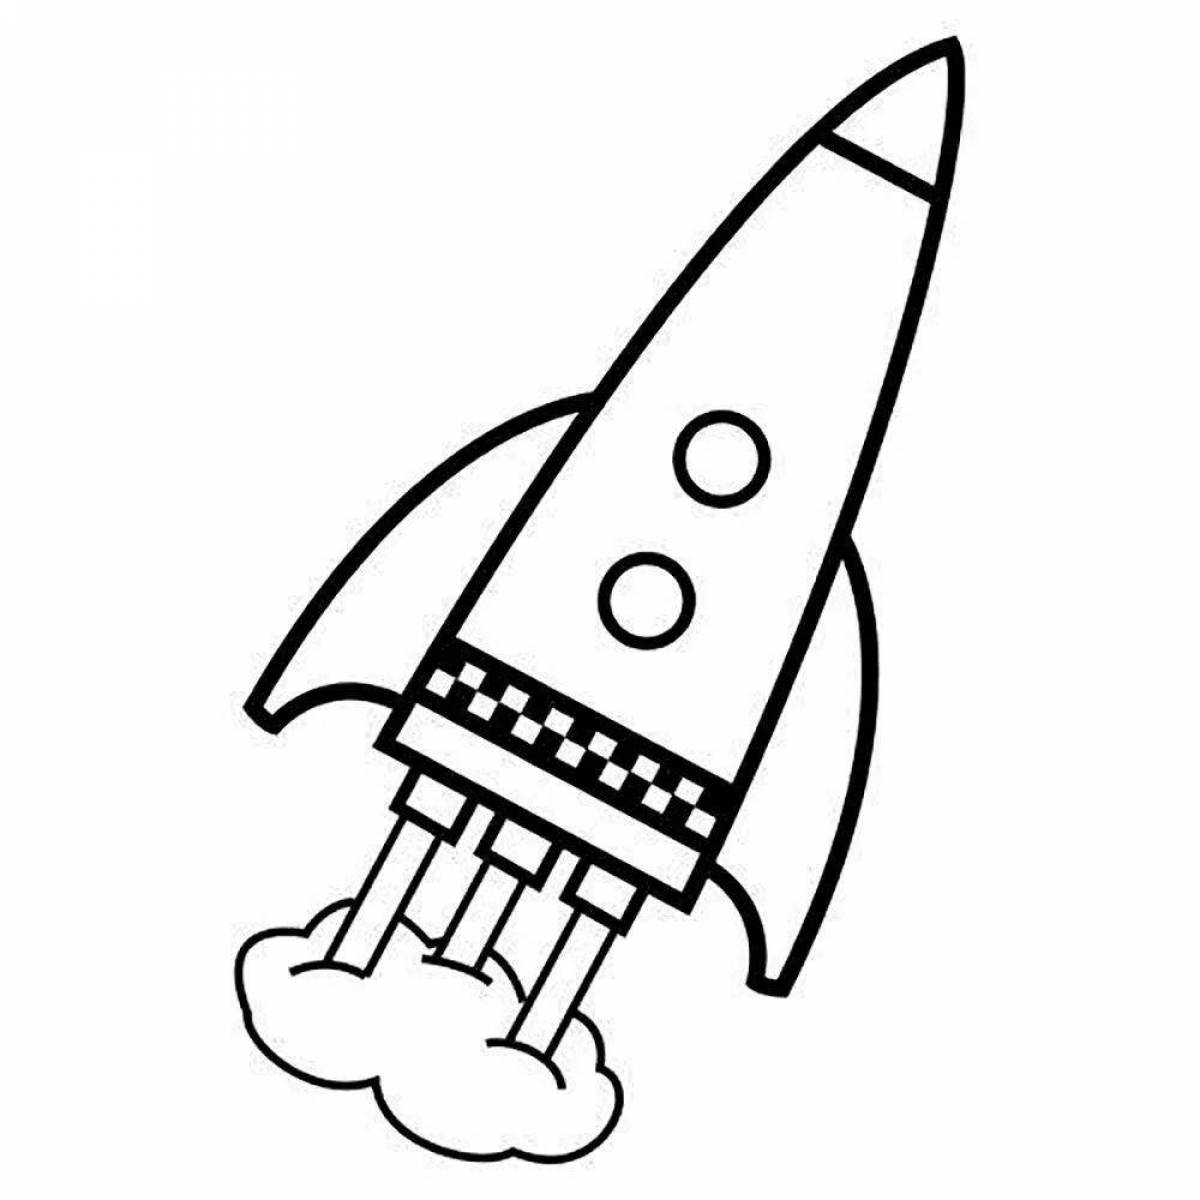 Extraordinary rocket coloring book for kids